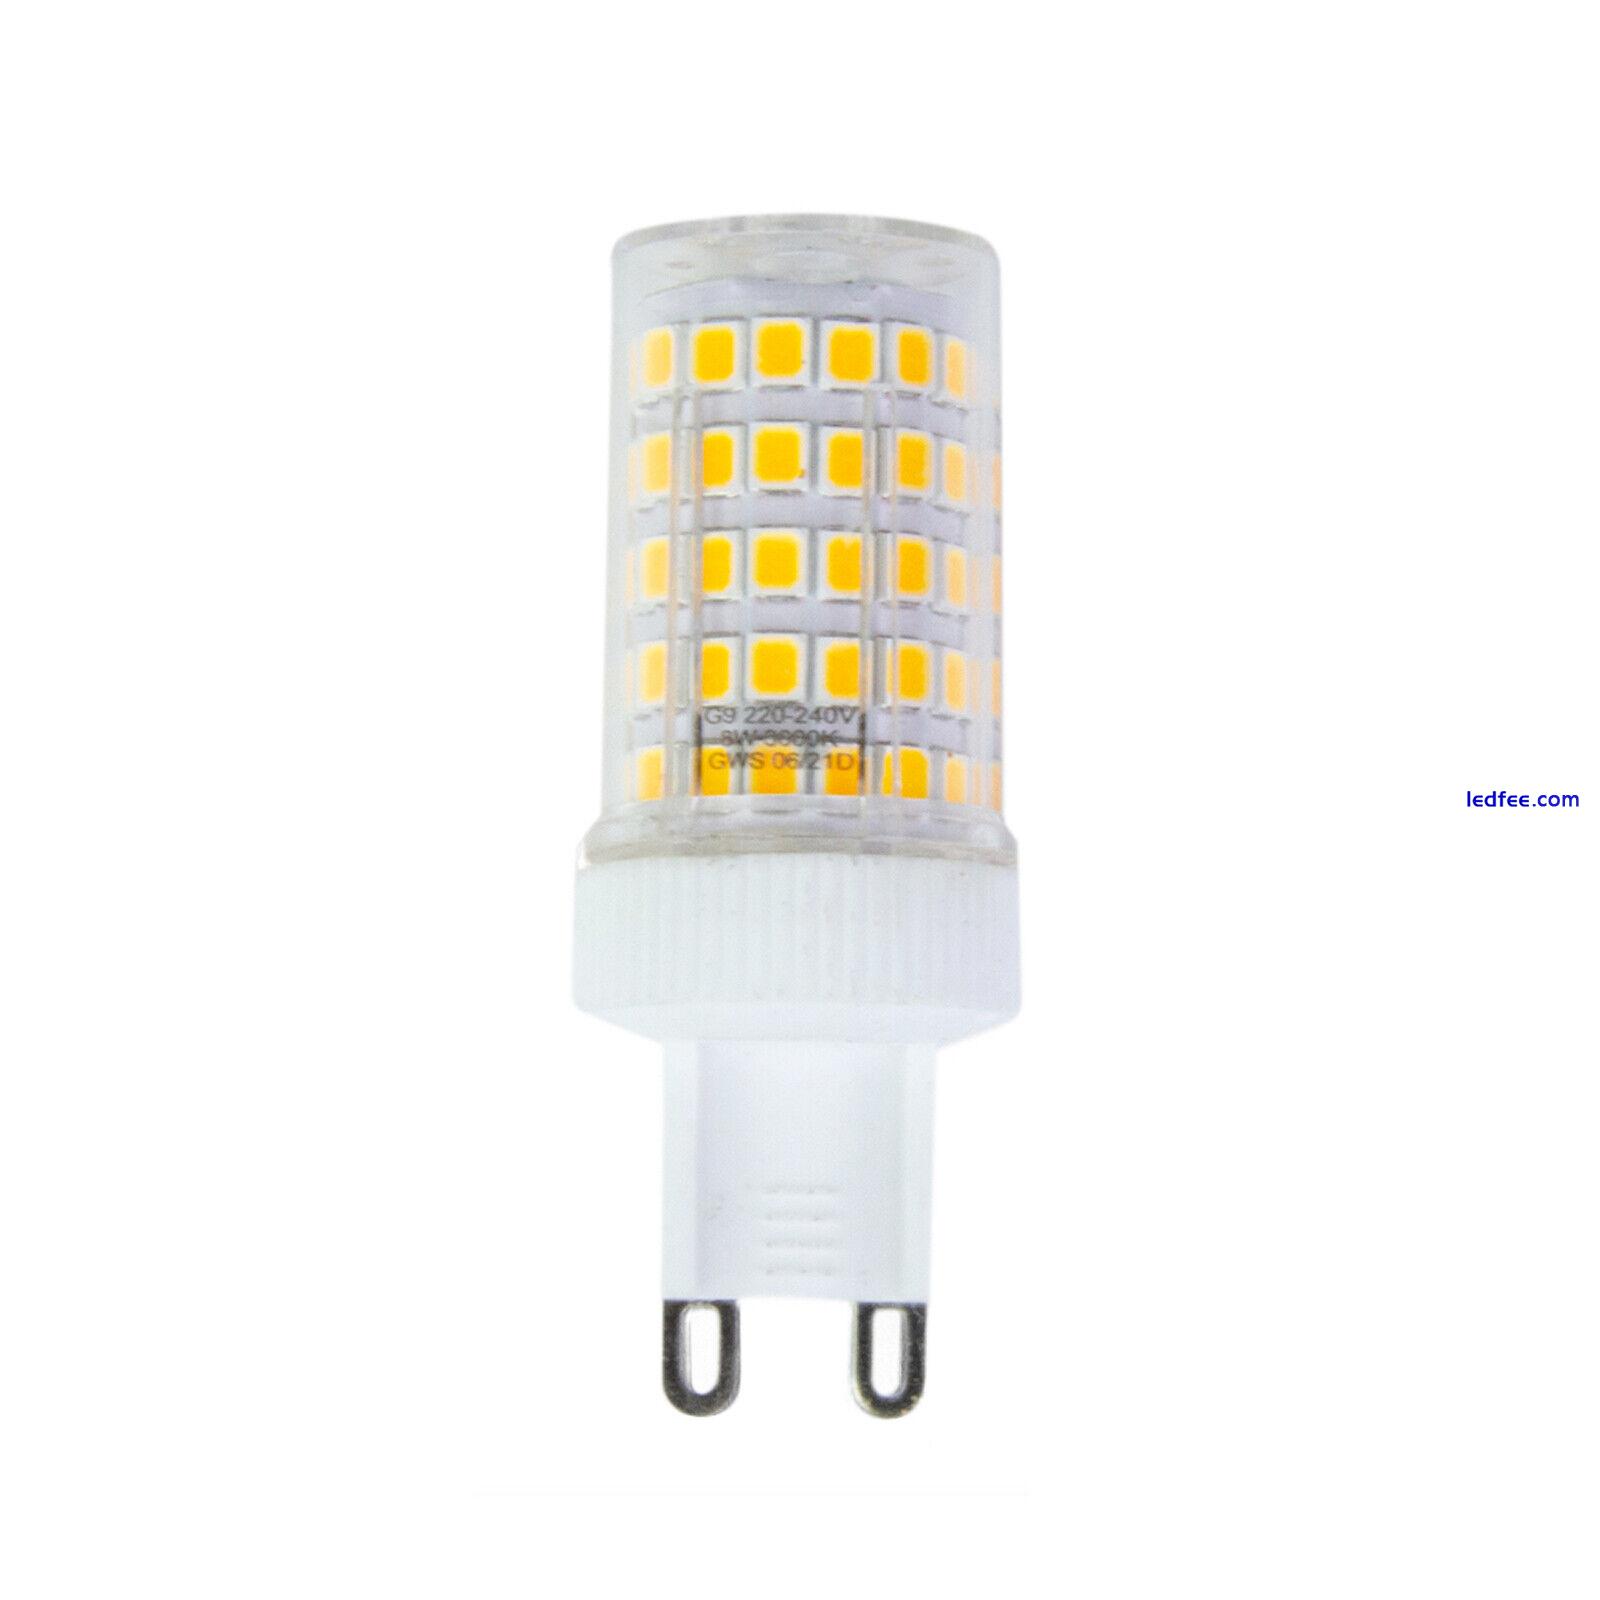 12V 3W G4 240V 5W 8W Dimmable G9 LED Capsule Light Bulbs Replace Halogen Lamp  3 